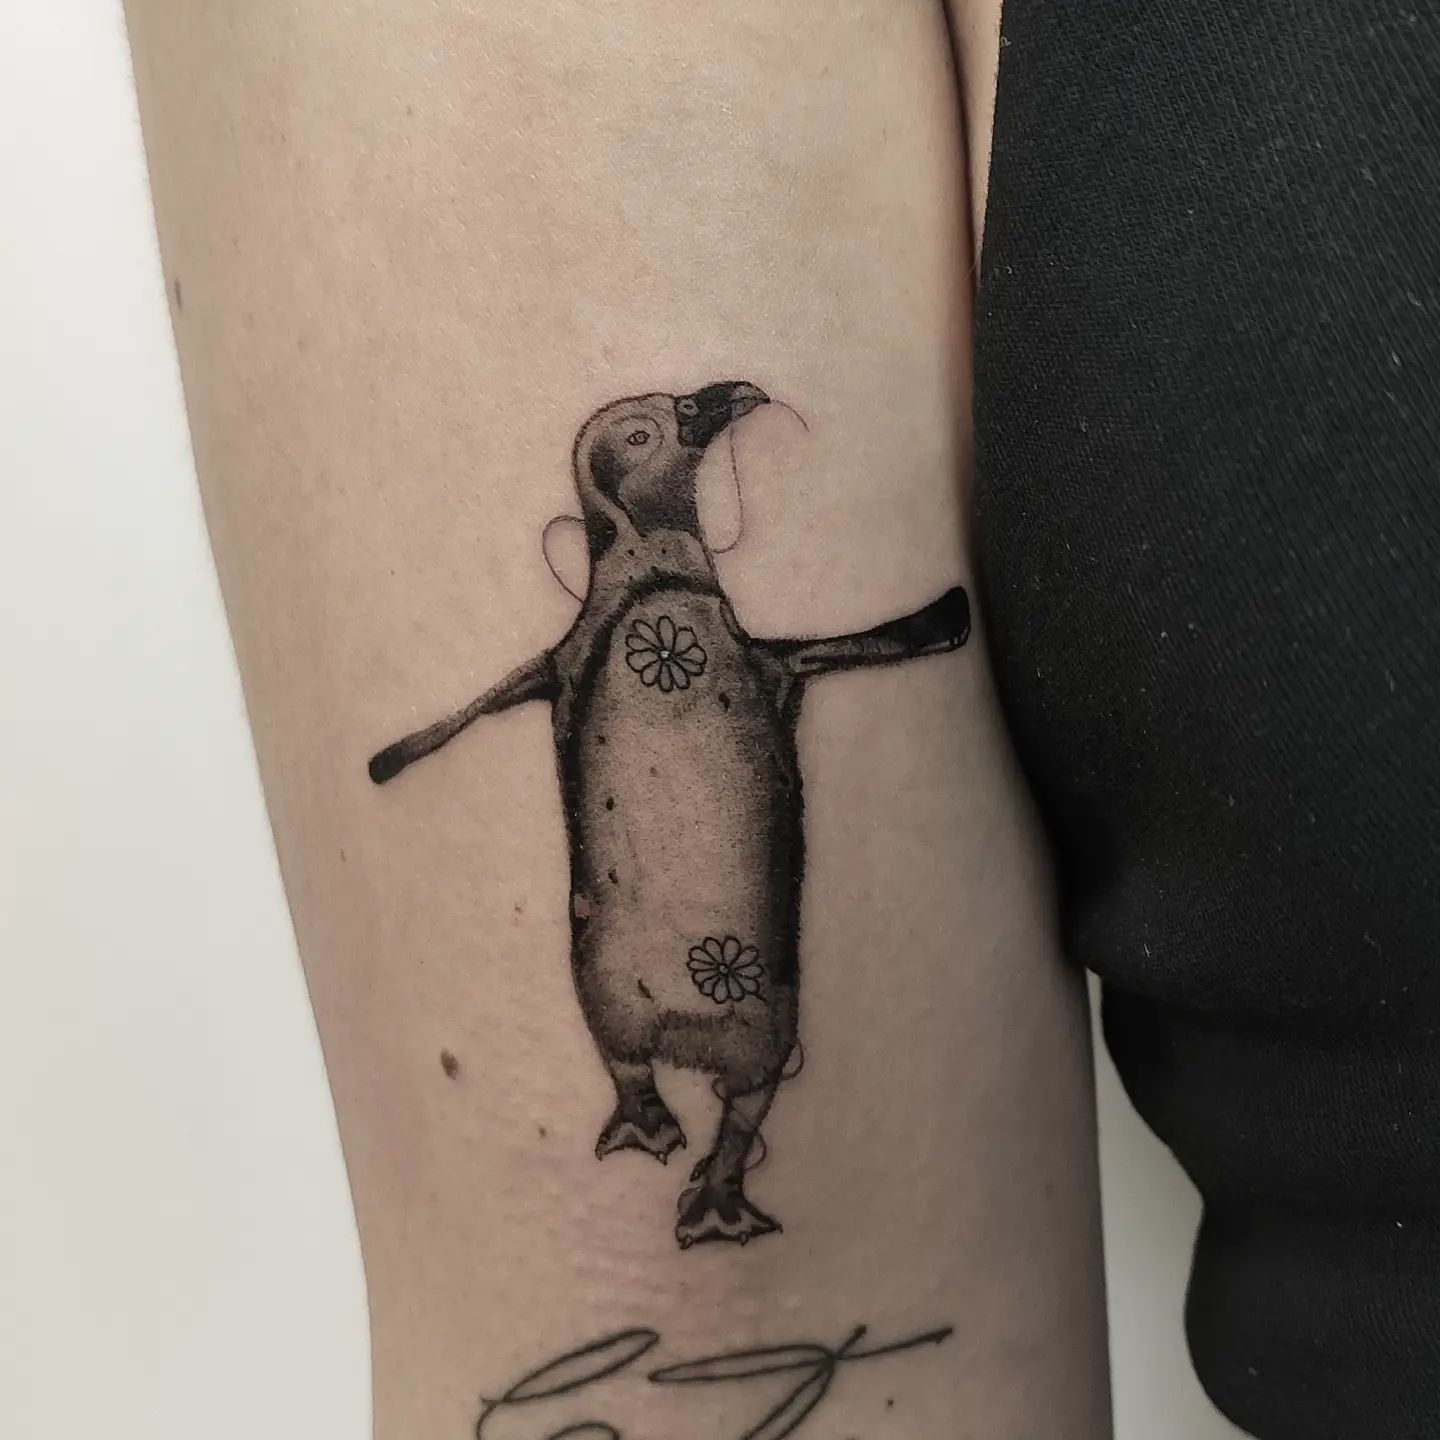 Here is a creative and unique design for you. Unlike most of the penguin tattoos, this tattoo is sure to give you a different look that others will notice.